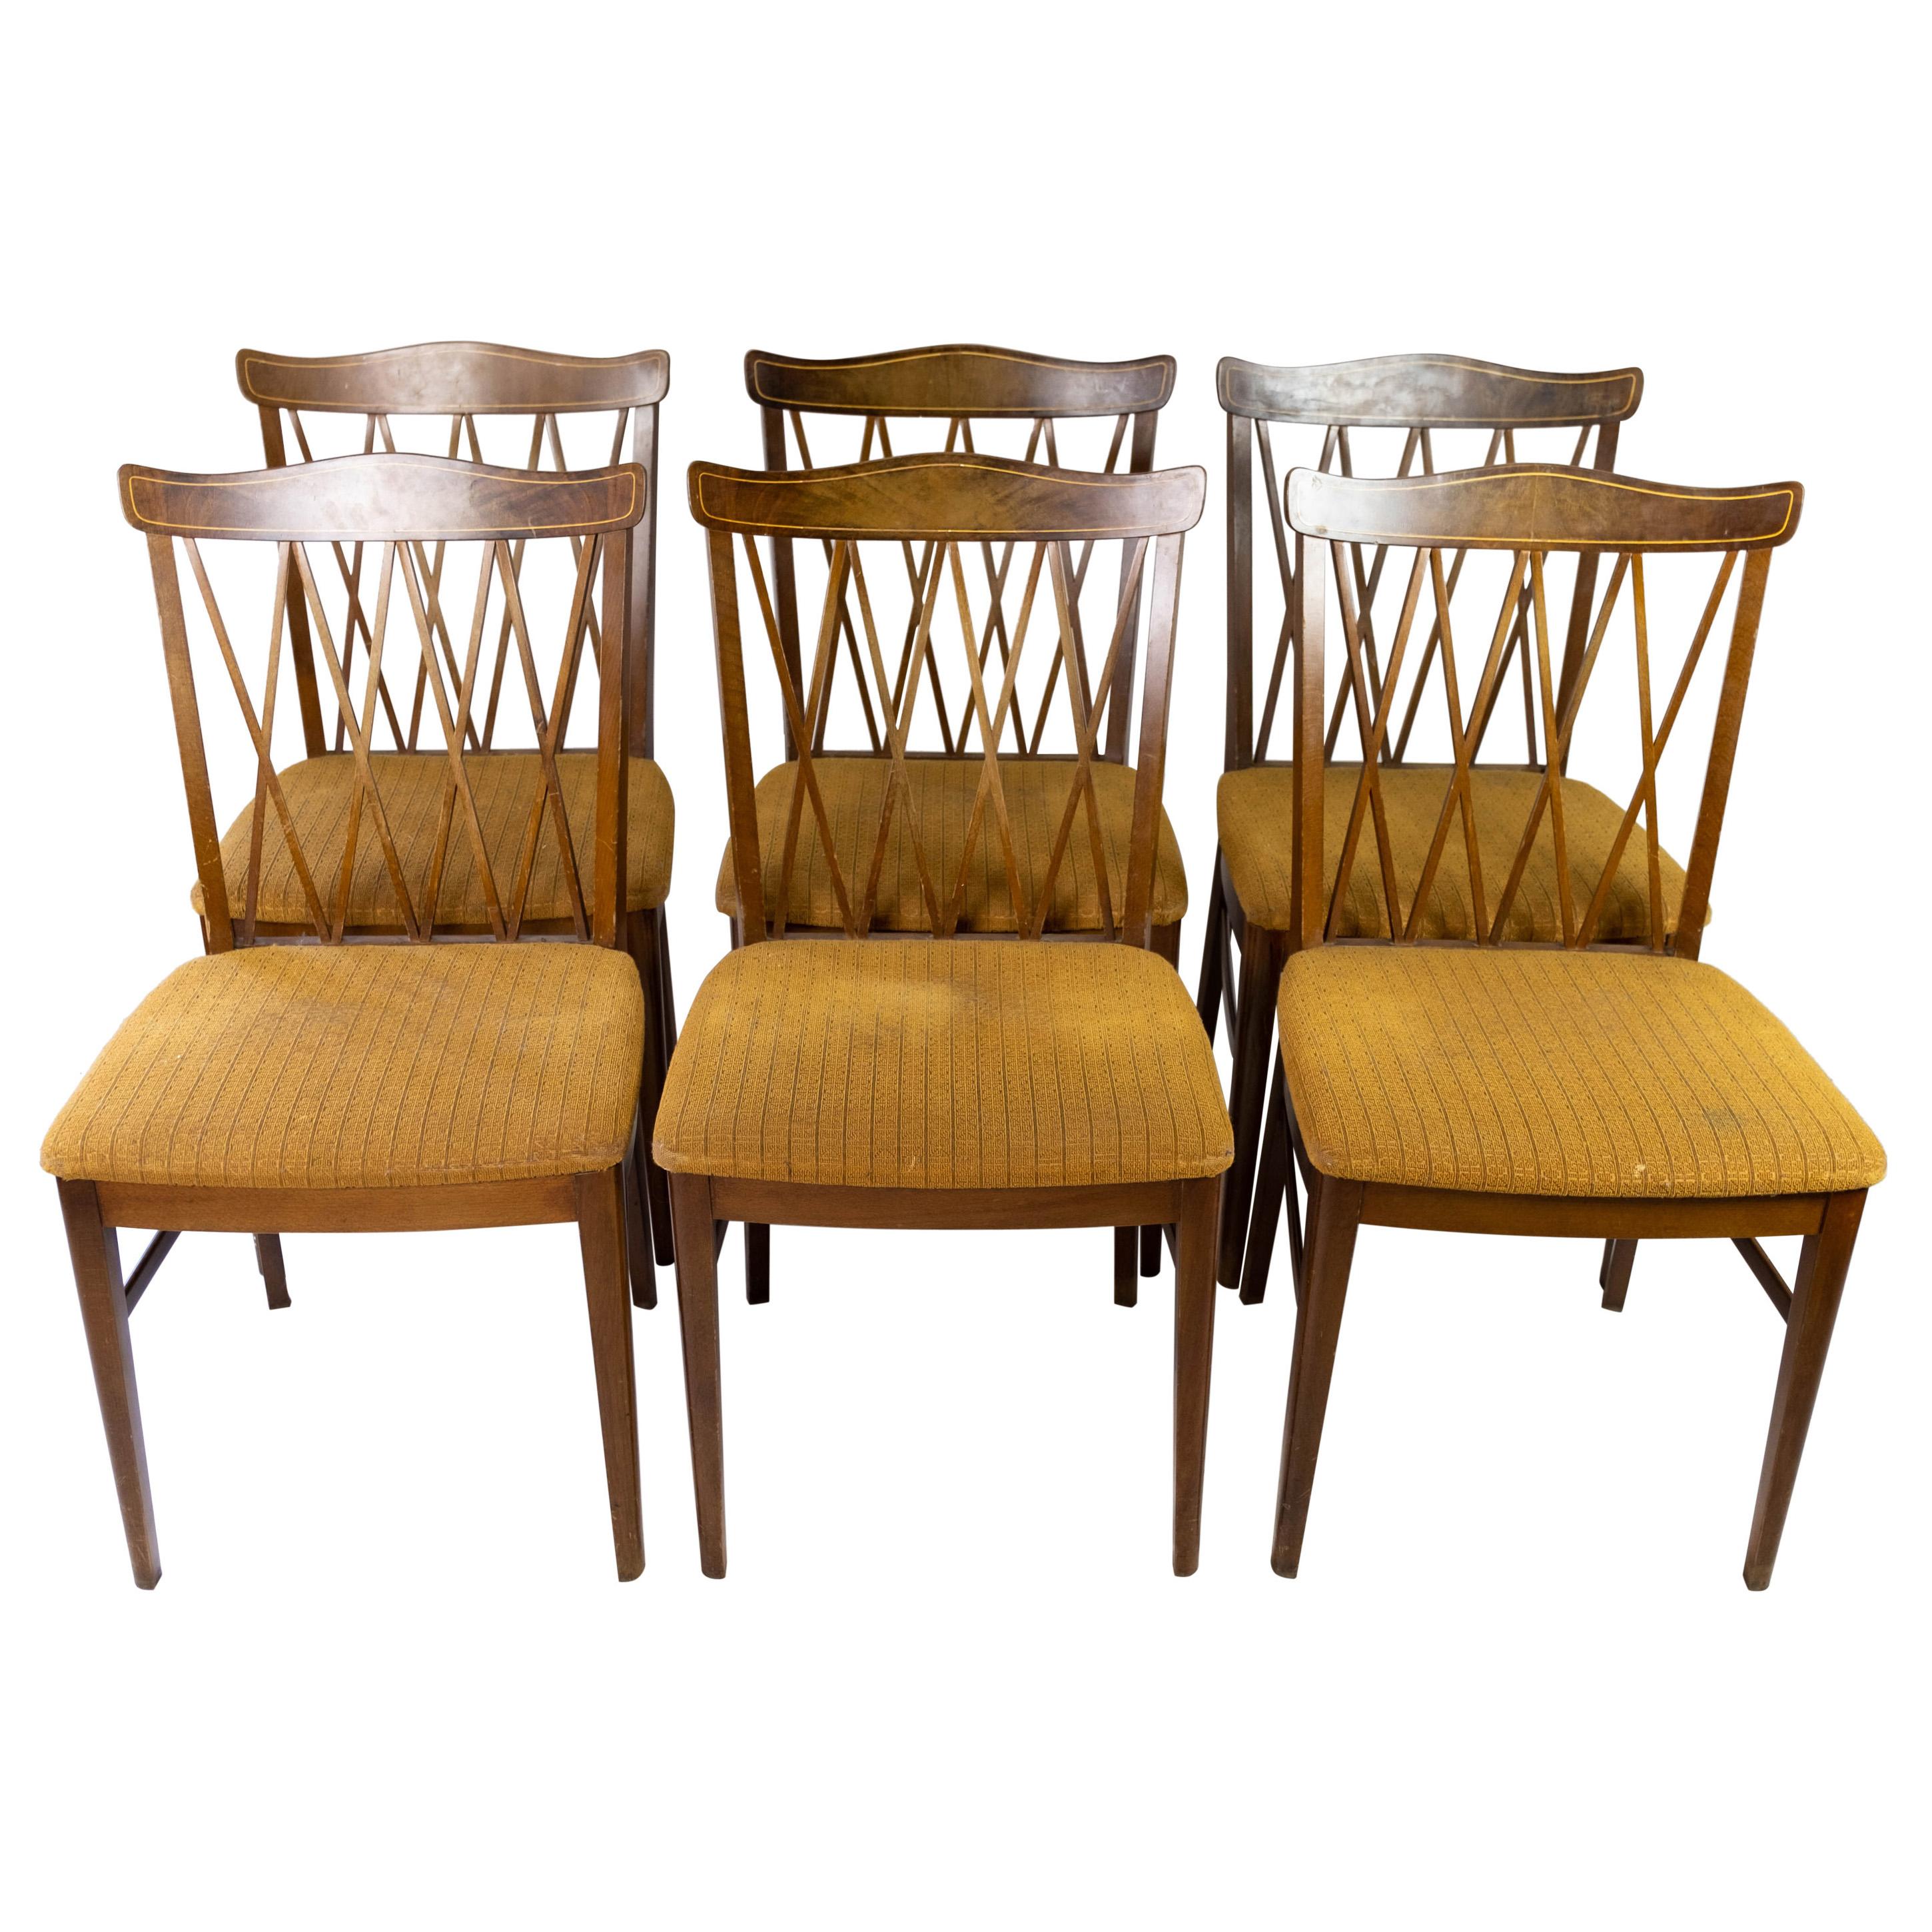 Set of Dining Room Chairs of Walnut and Upholstered with Dark Fabric, 1940s